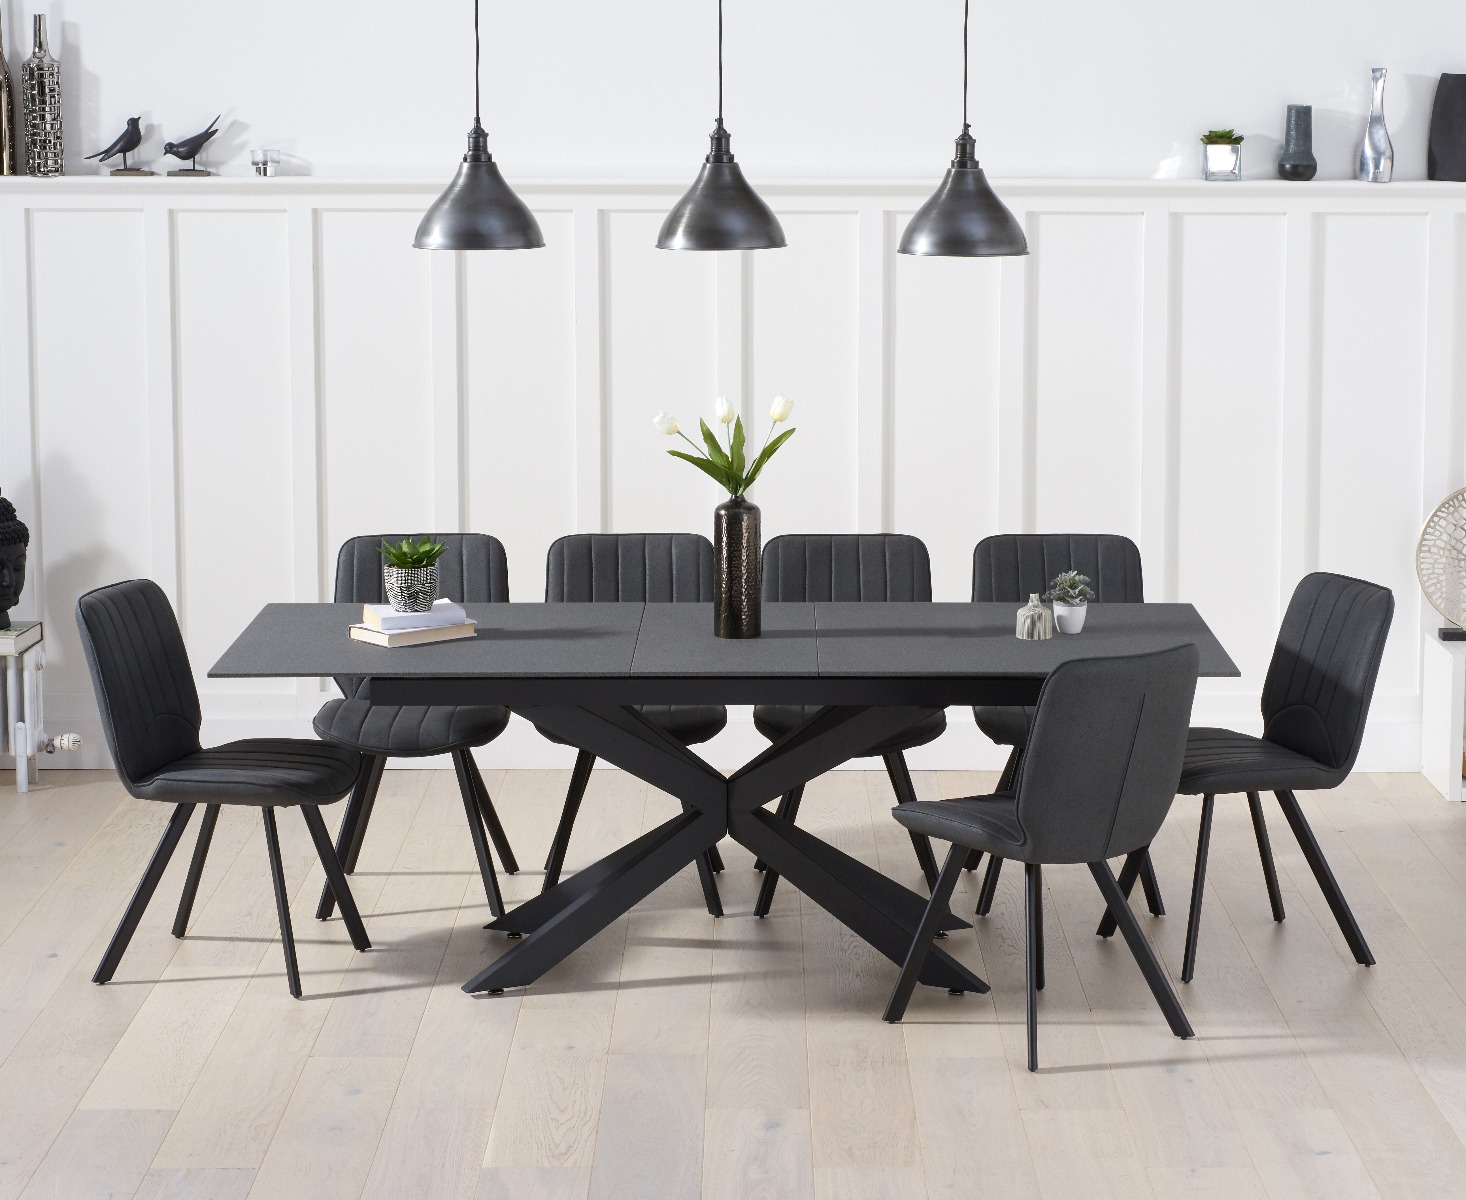 Extending Boston 180cm Grey Stone Dining Table With 6 Brown Hendrick Chairs